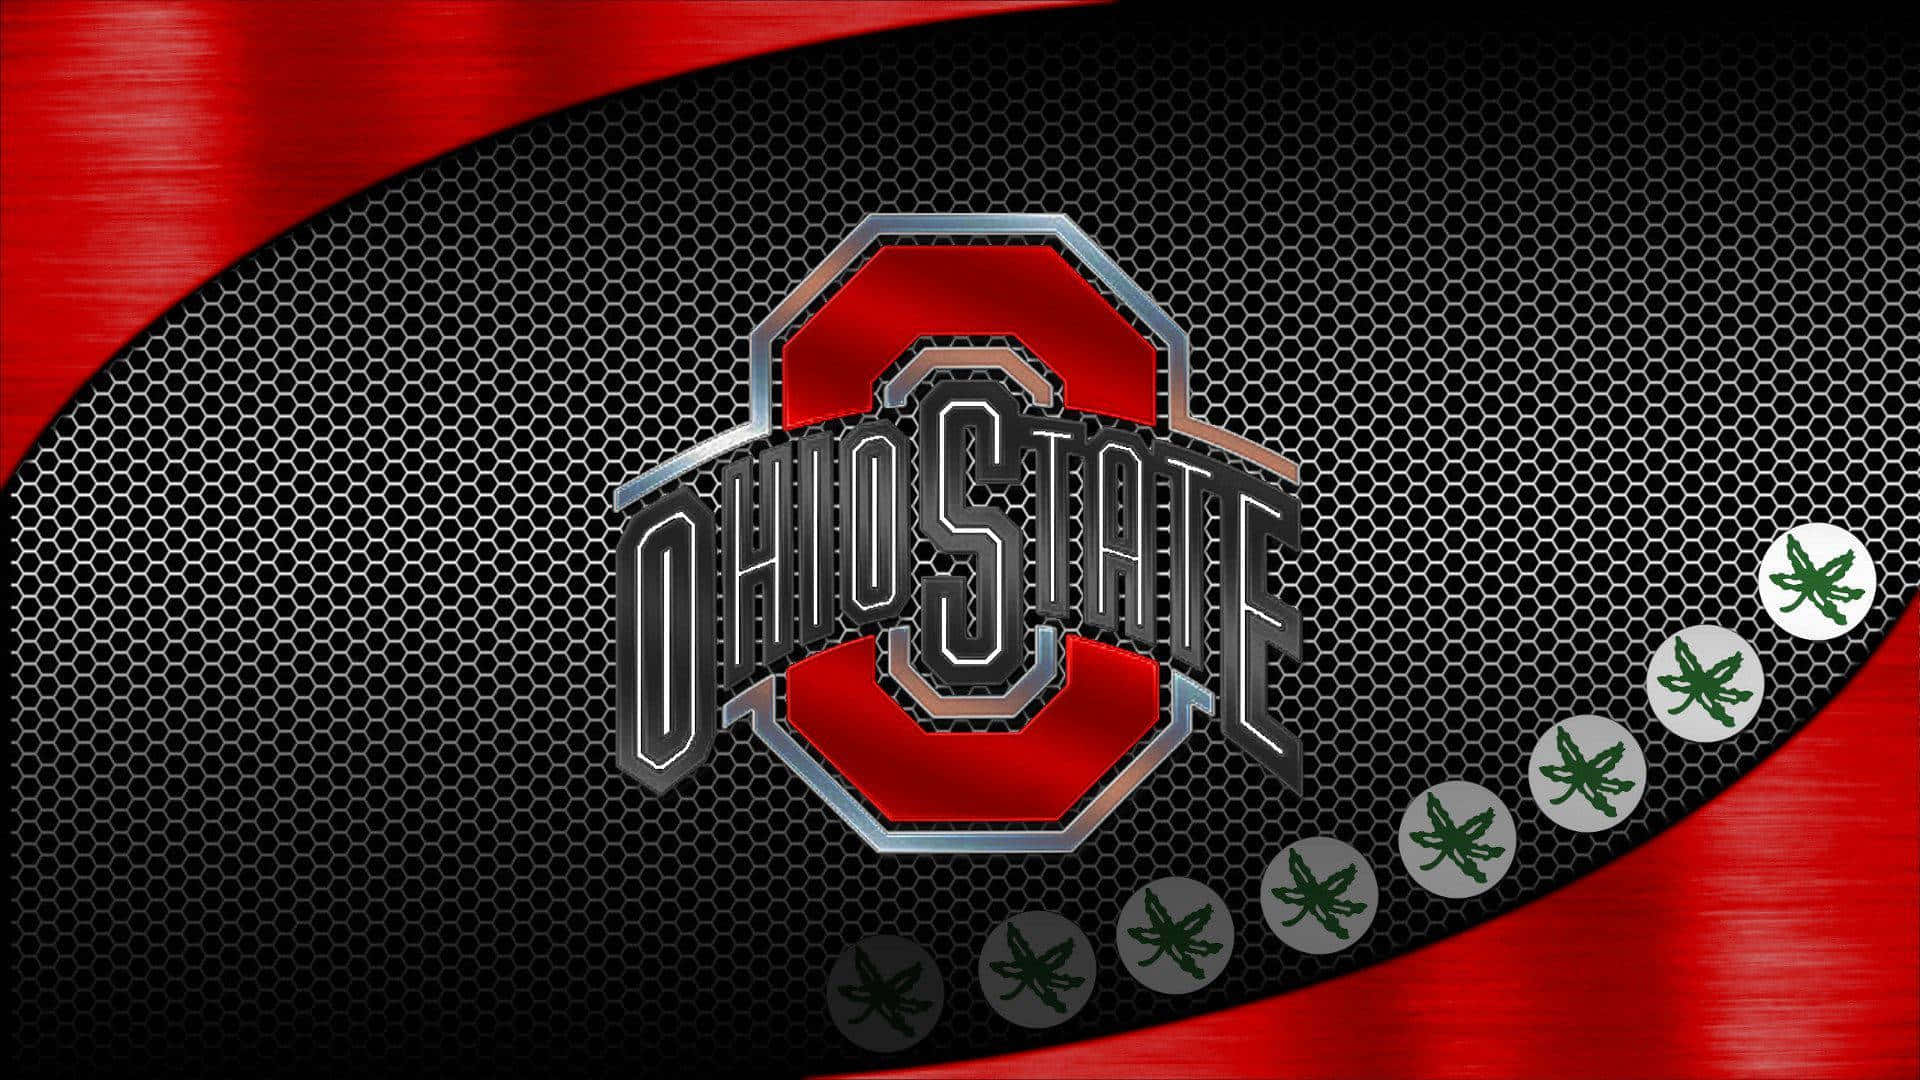 “Feel the Cool Ohio State swagger!” Wallpaper